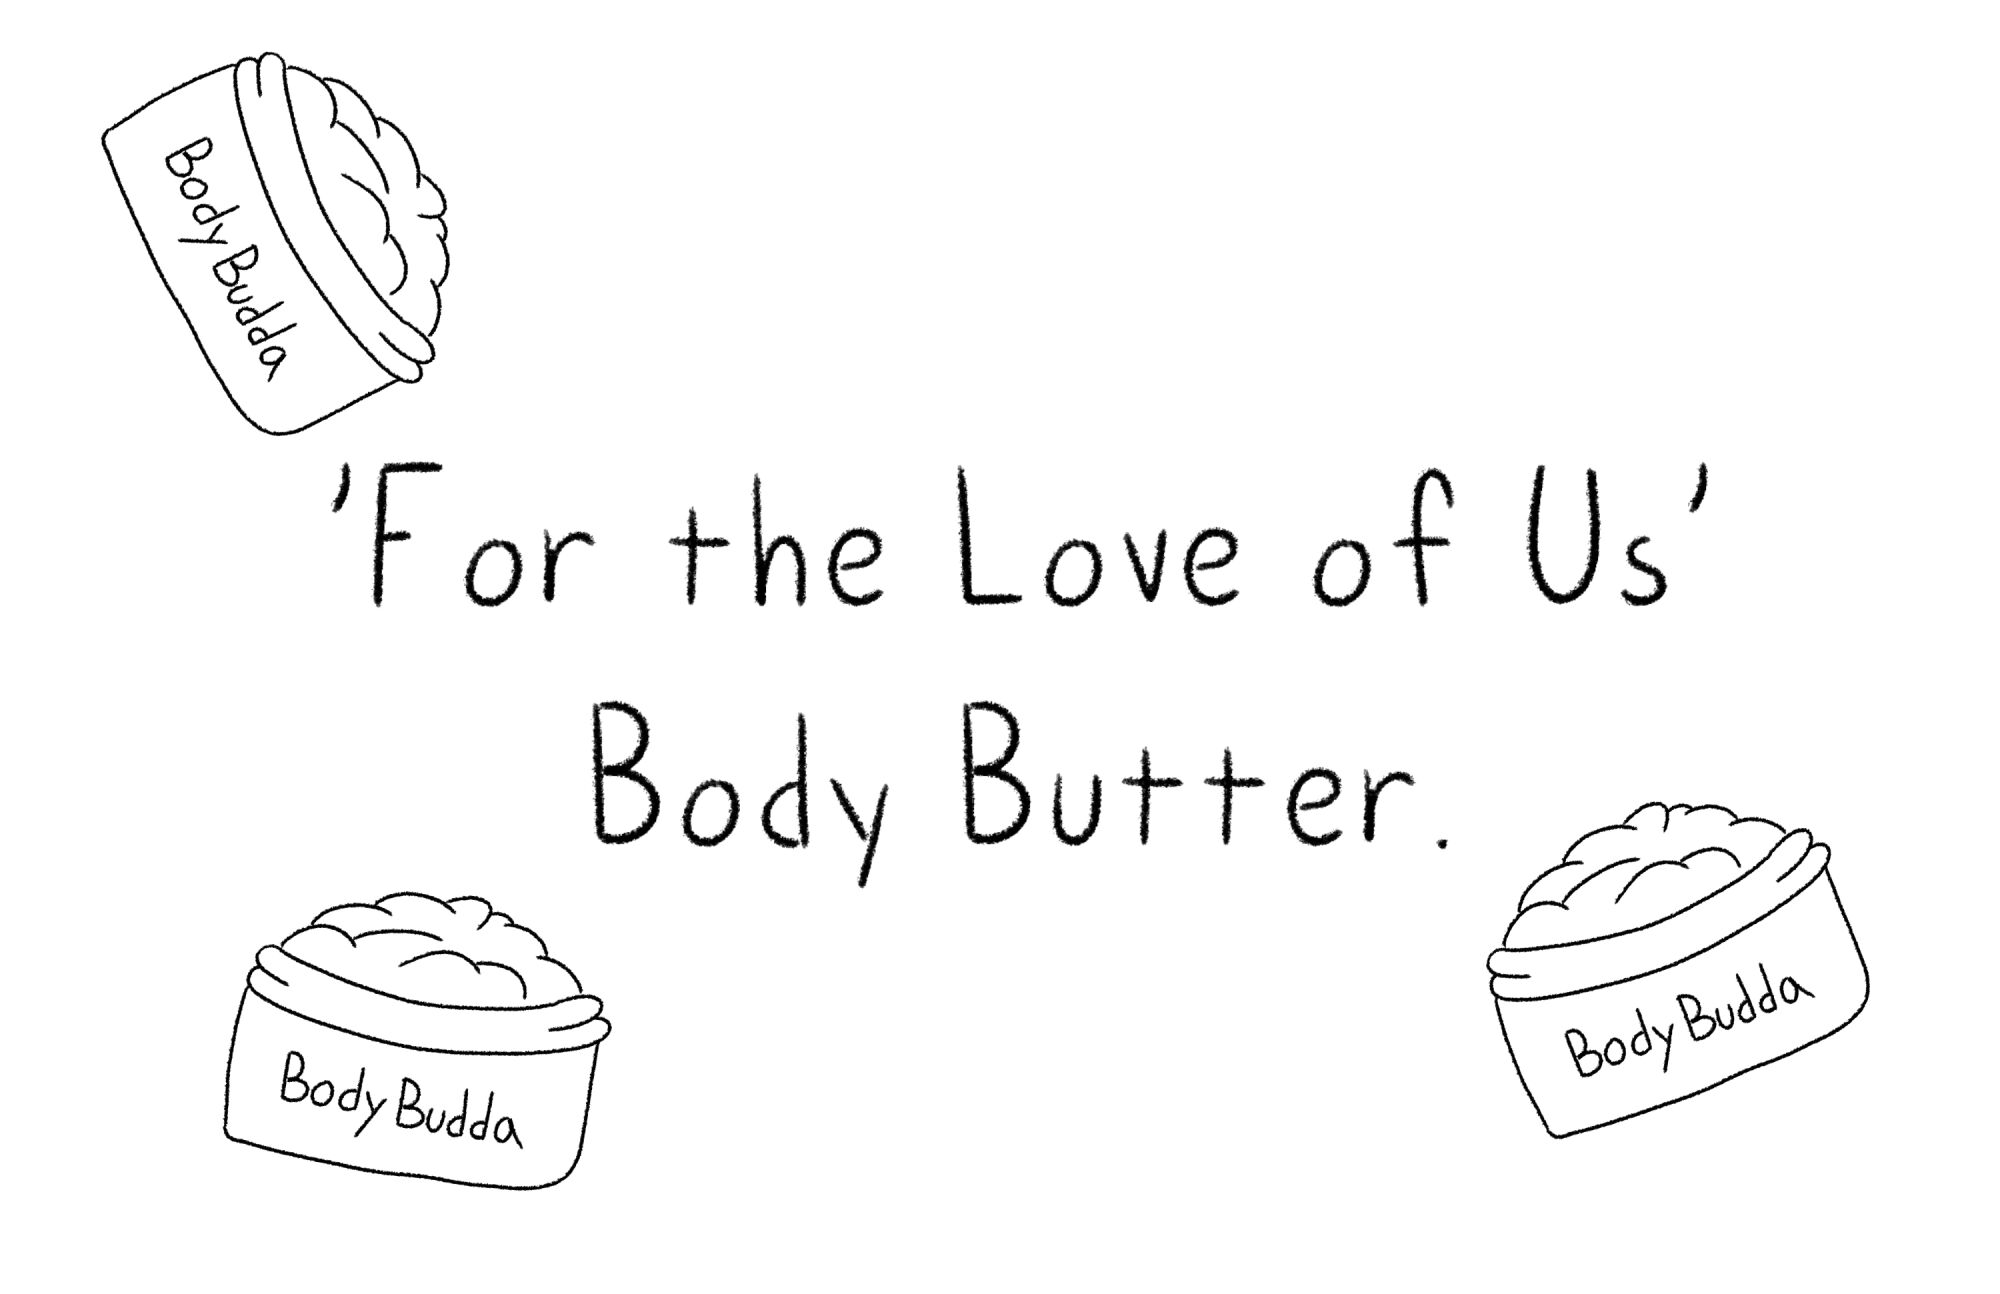 Pots of Body Budda with the words "For the Love of Us Body Butter"